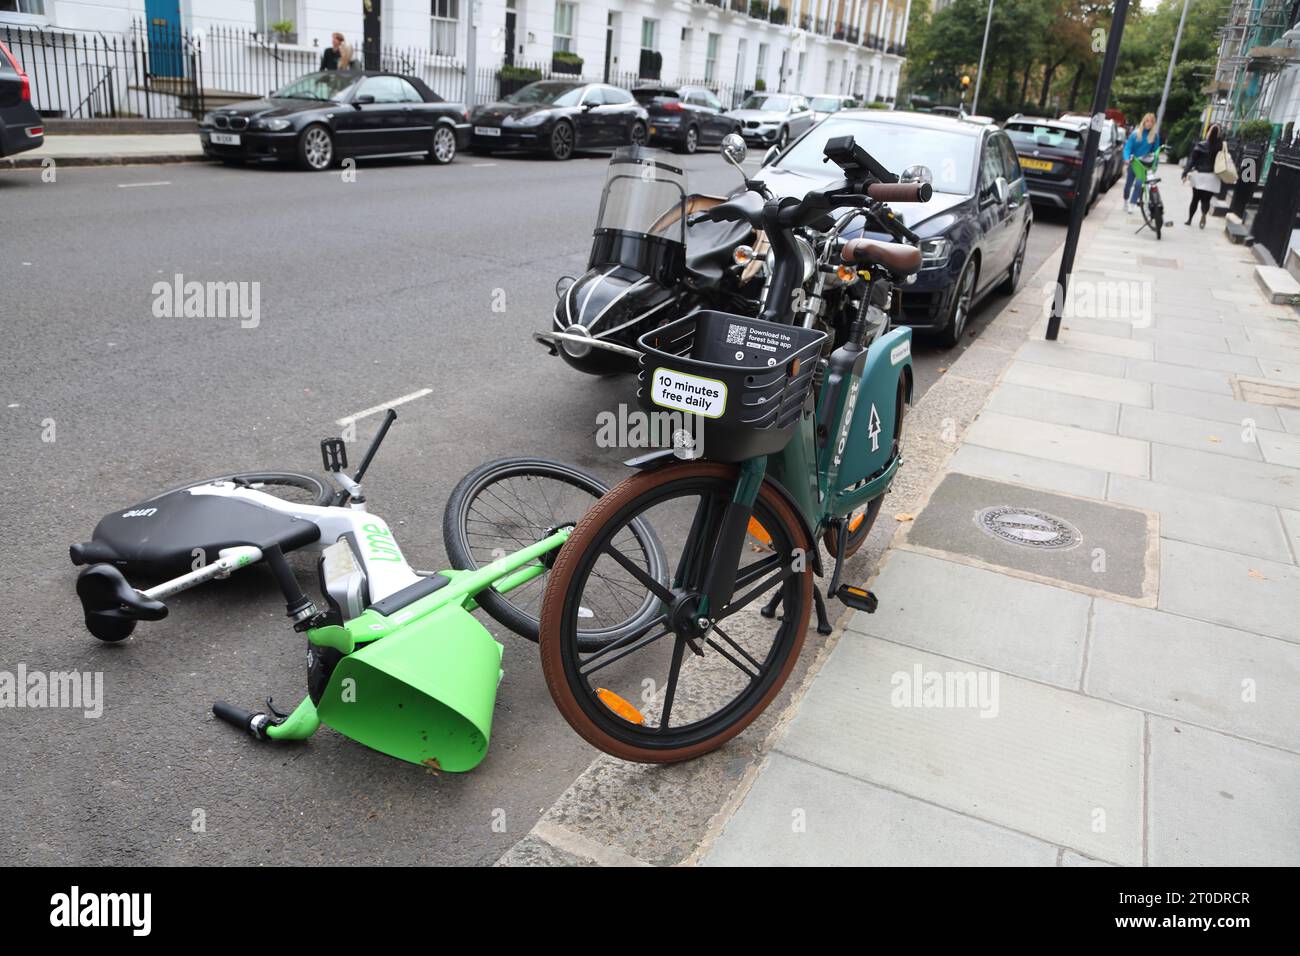 Forest (Formerly Humanforest)  e-Bike Dockless Bicycle Hire System and Lime e-Bike Chelsea London England Stock Photo